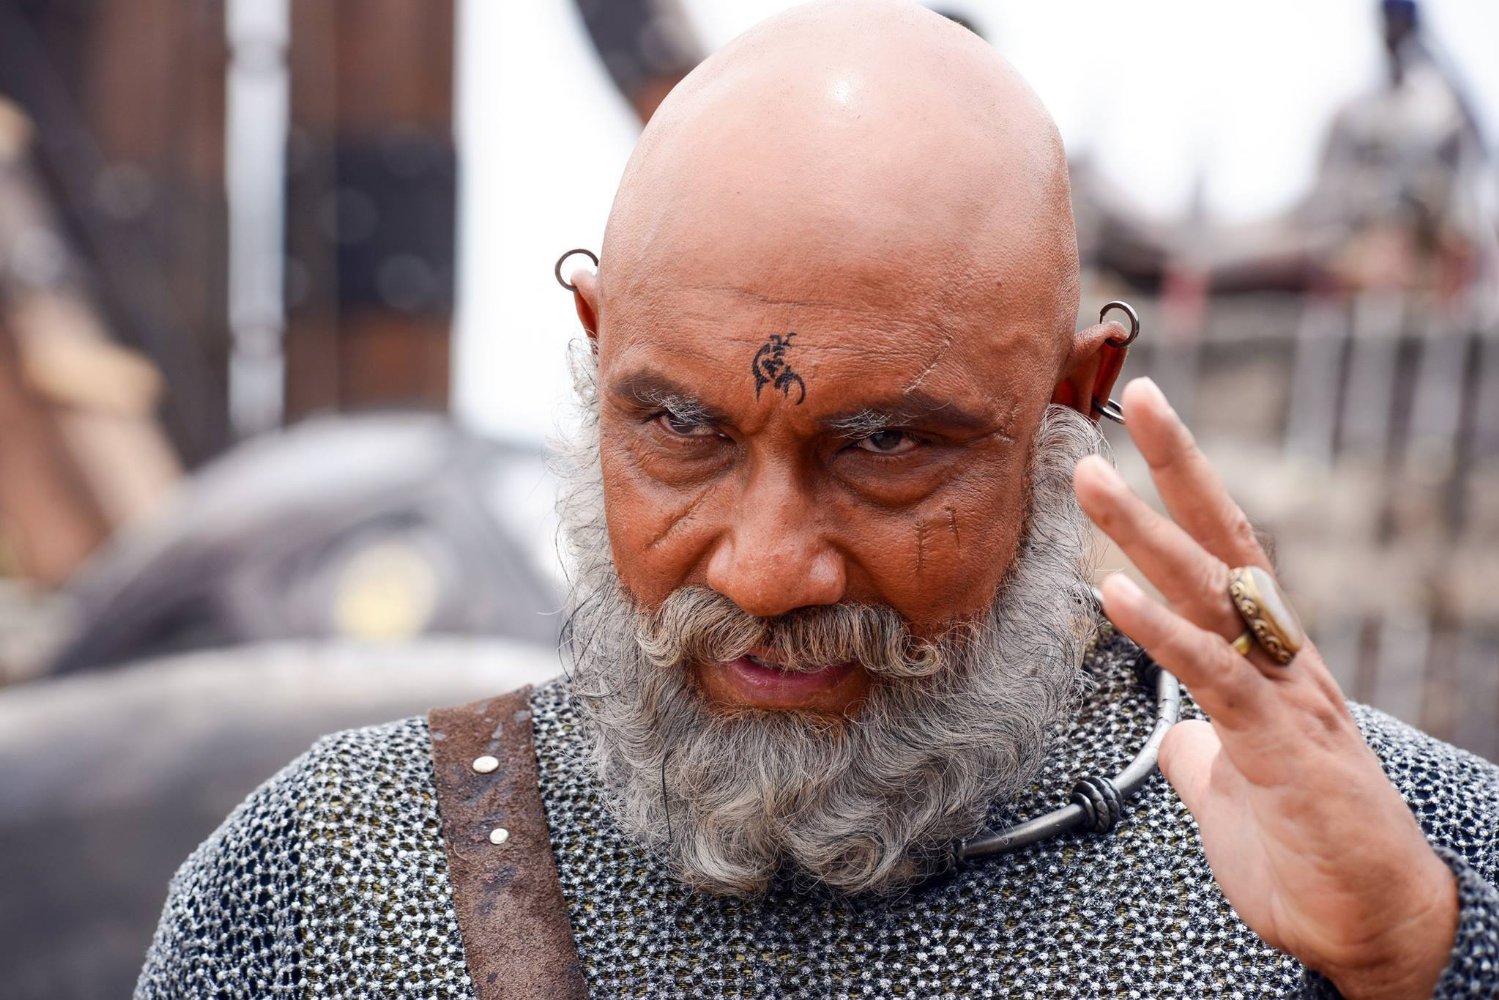 Actor Sathyaraj From Baahubali Is In The Hospital With COVID, According To Reports